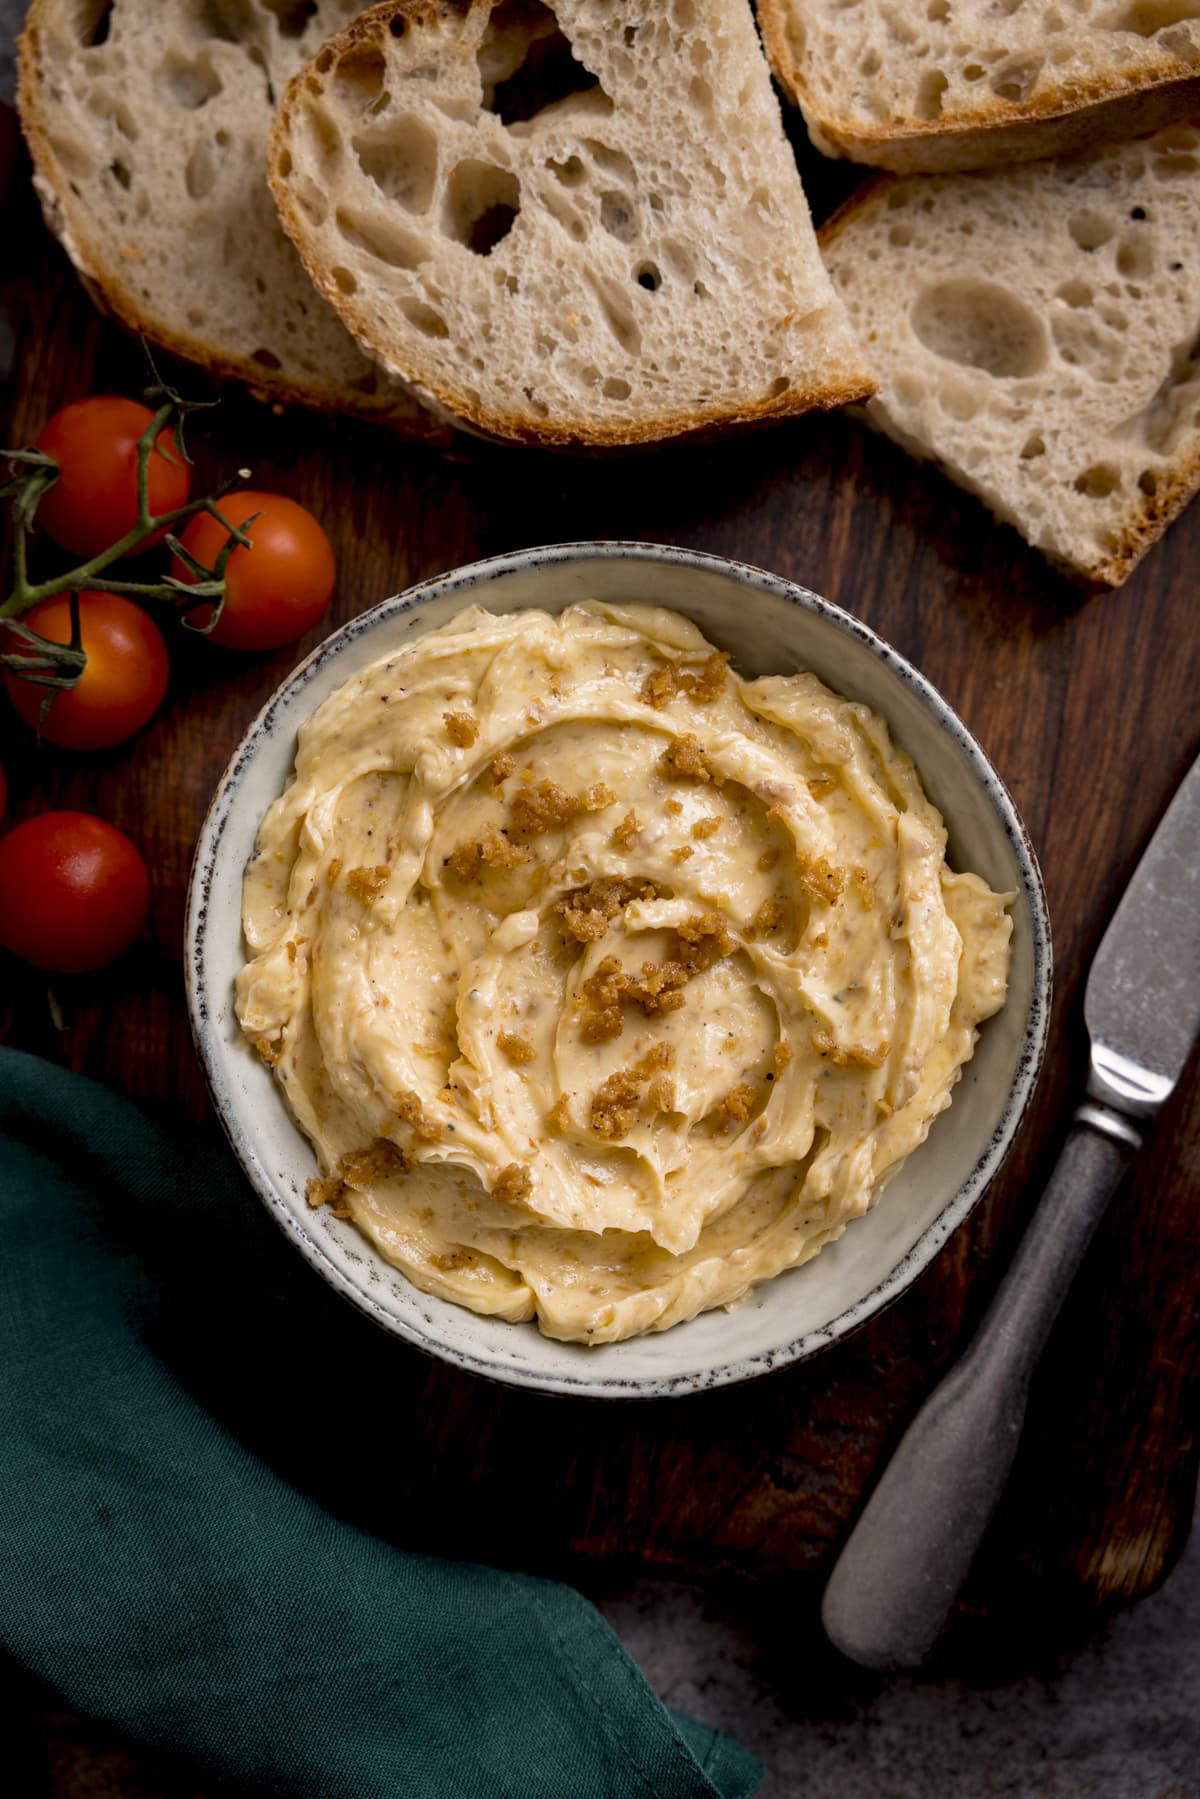 Overhead image of chicken skin butter in a grey bowl on a wooden board. There are slices of bread, some vine cherry tomatoes, a knife and a green napkin around the bowl.